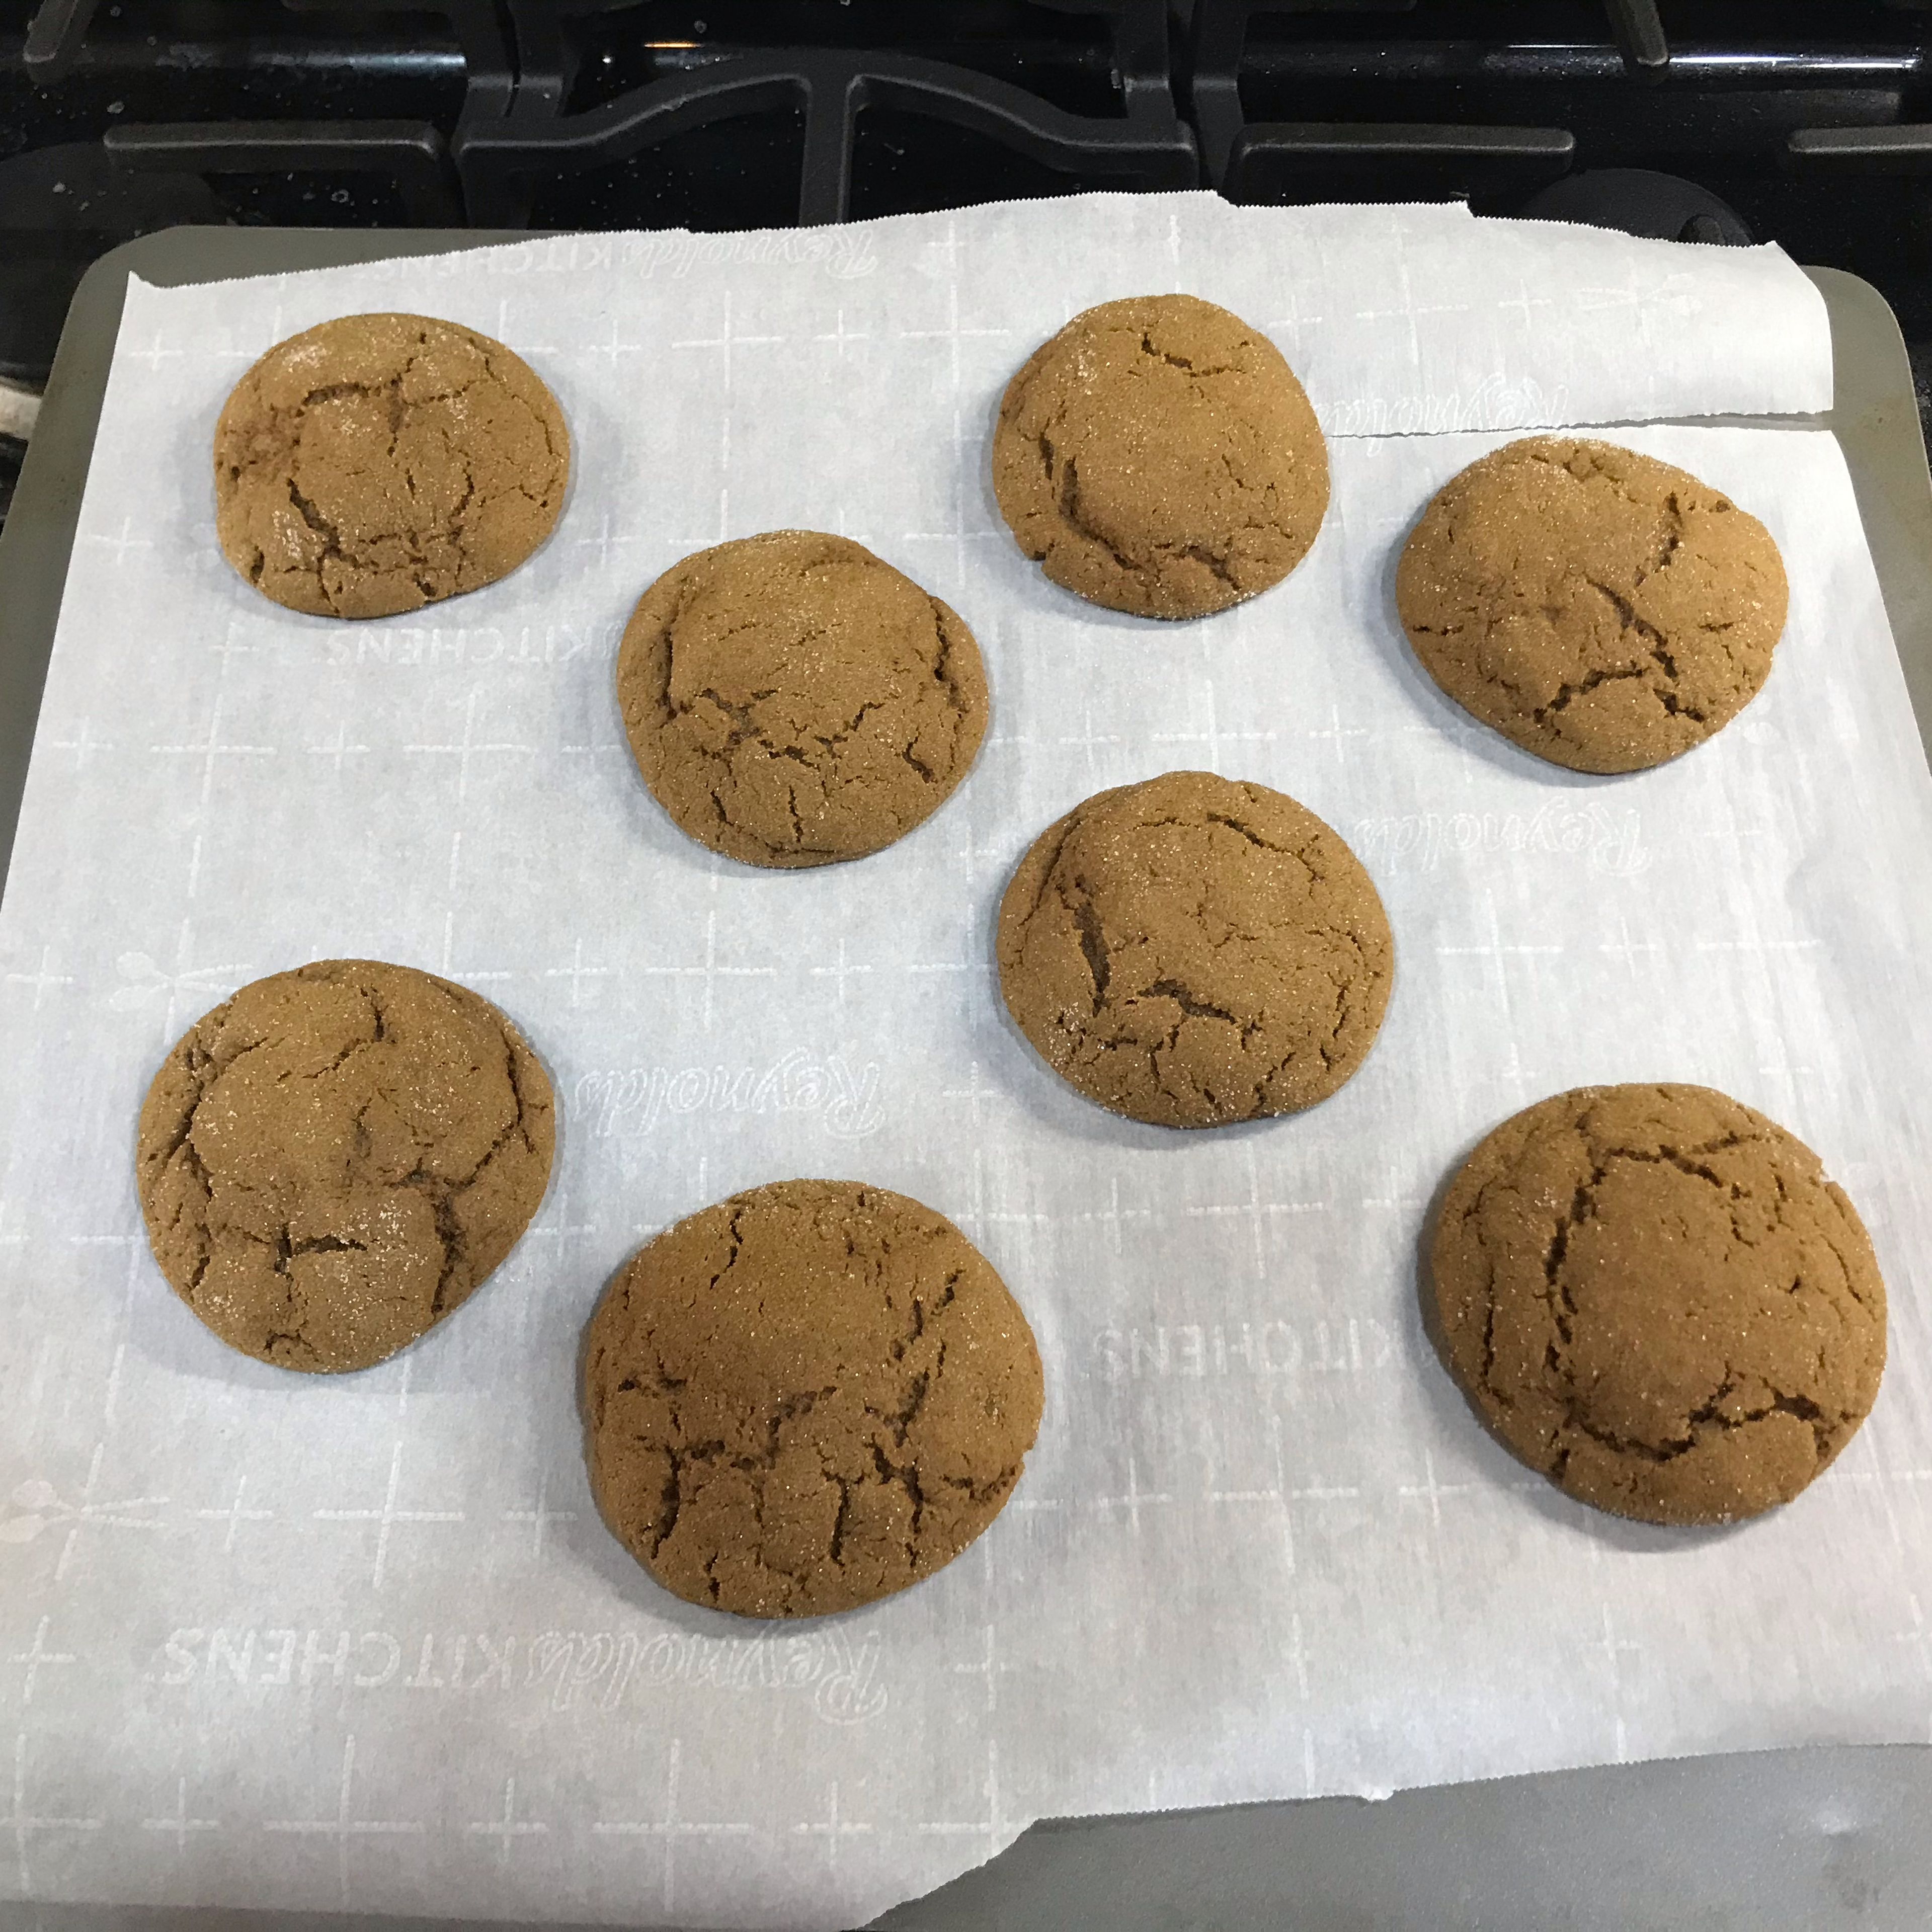 Bake for 12-15 minutes, until the top is crackly but still soft to the touch. Let the cookies cool on the pan for 10 minutes, then move to cool completely on a cooling rack. The surface will firm up as they cool.